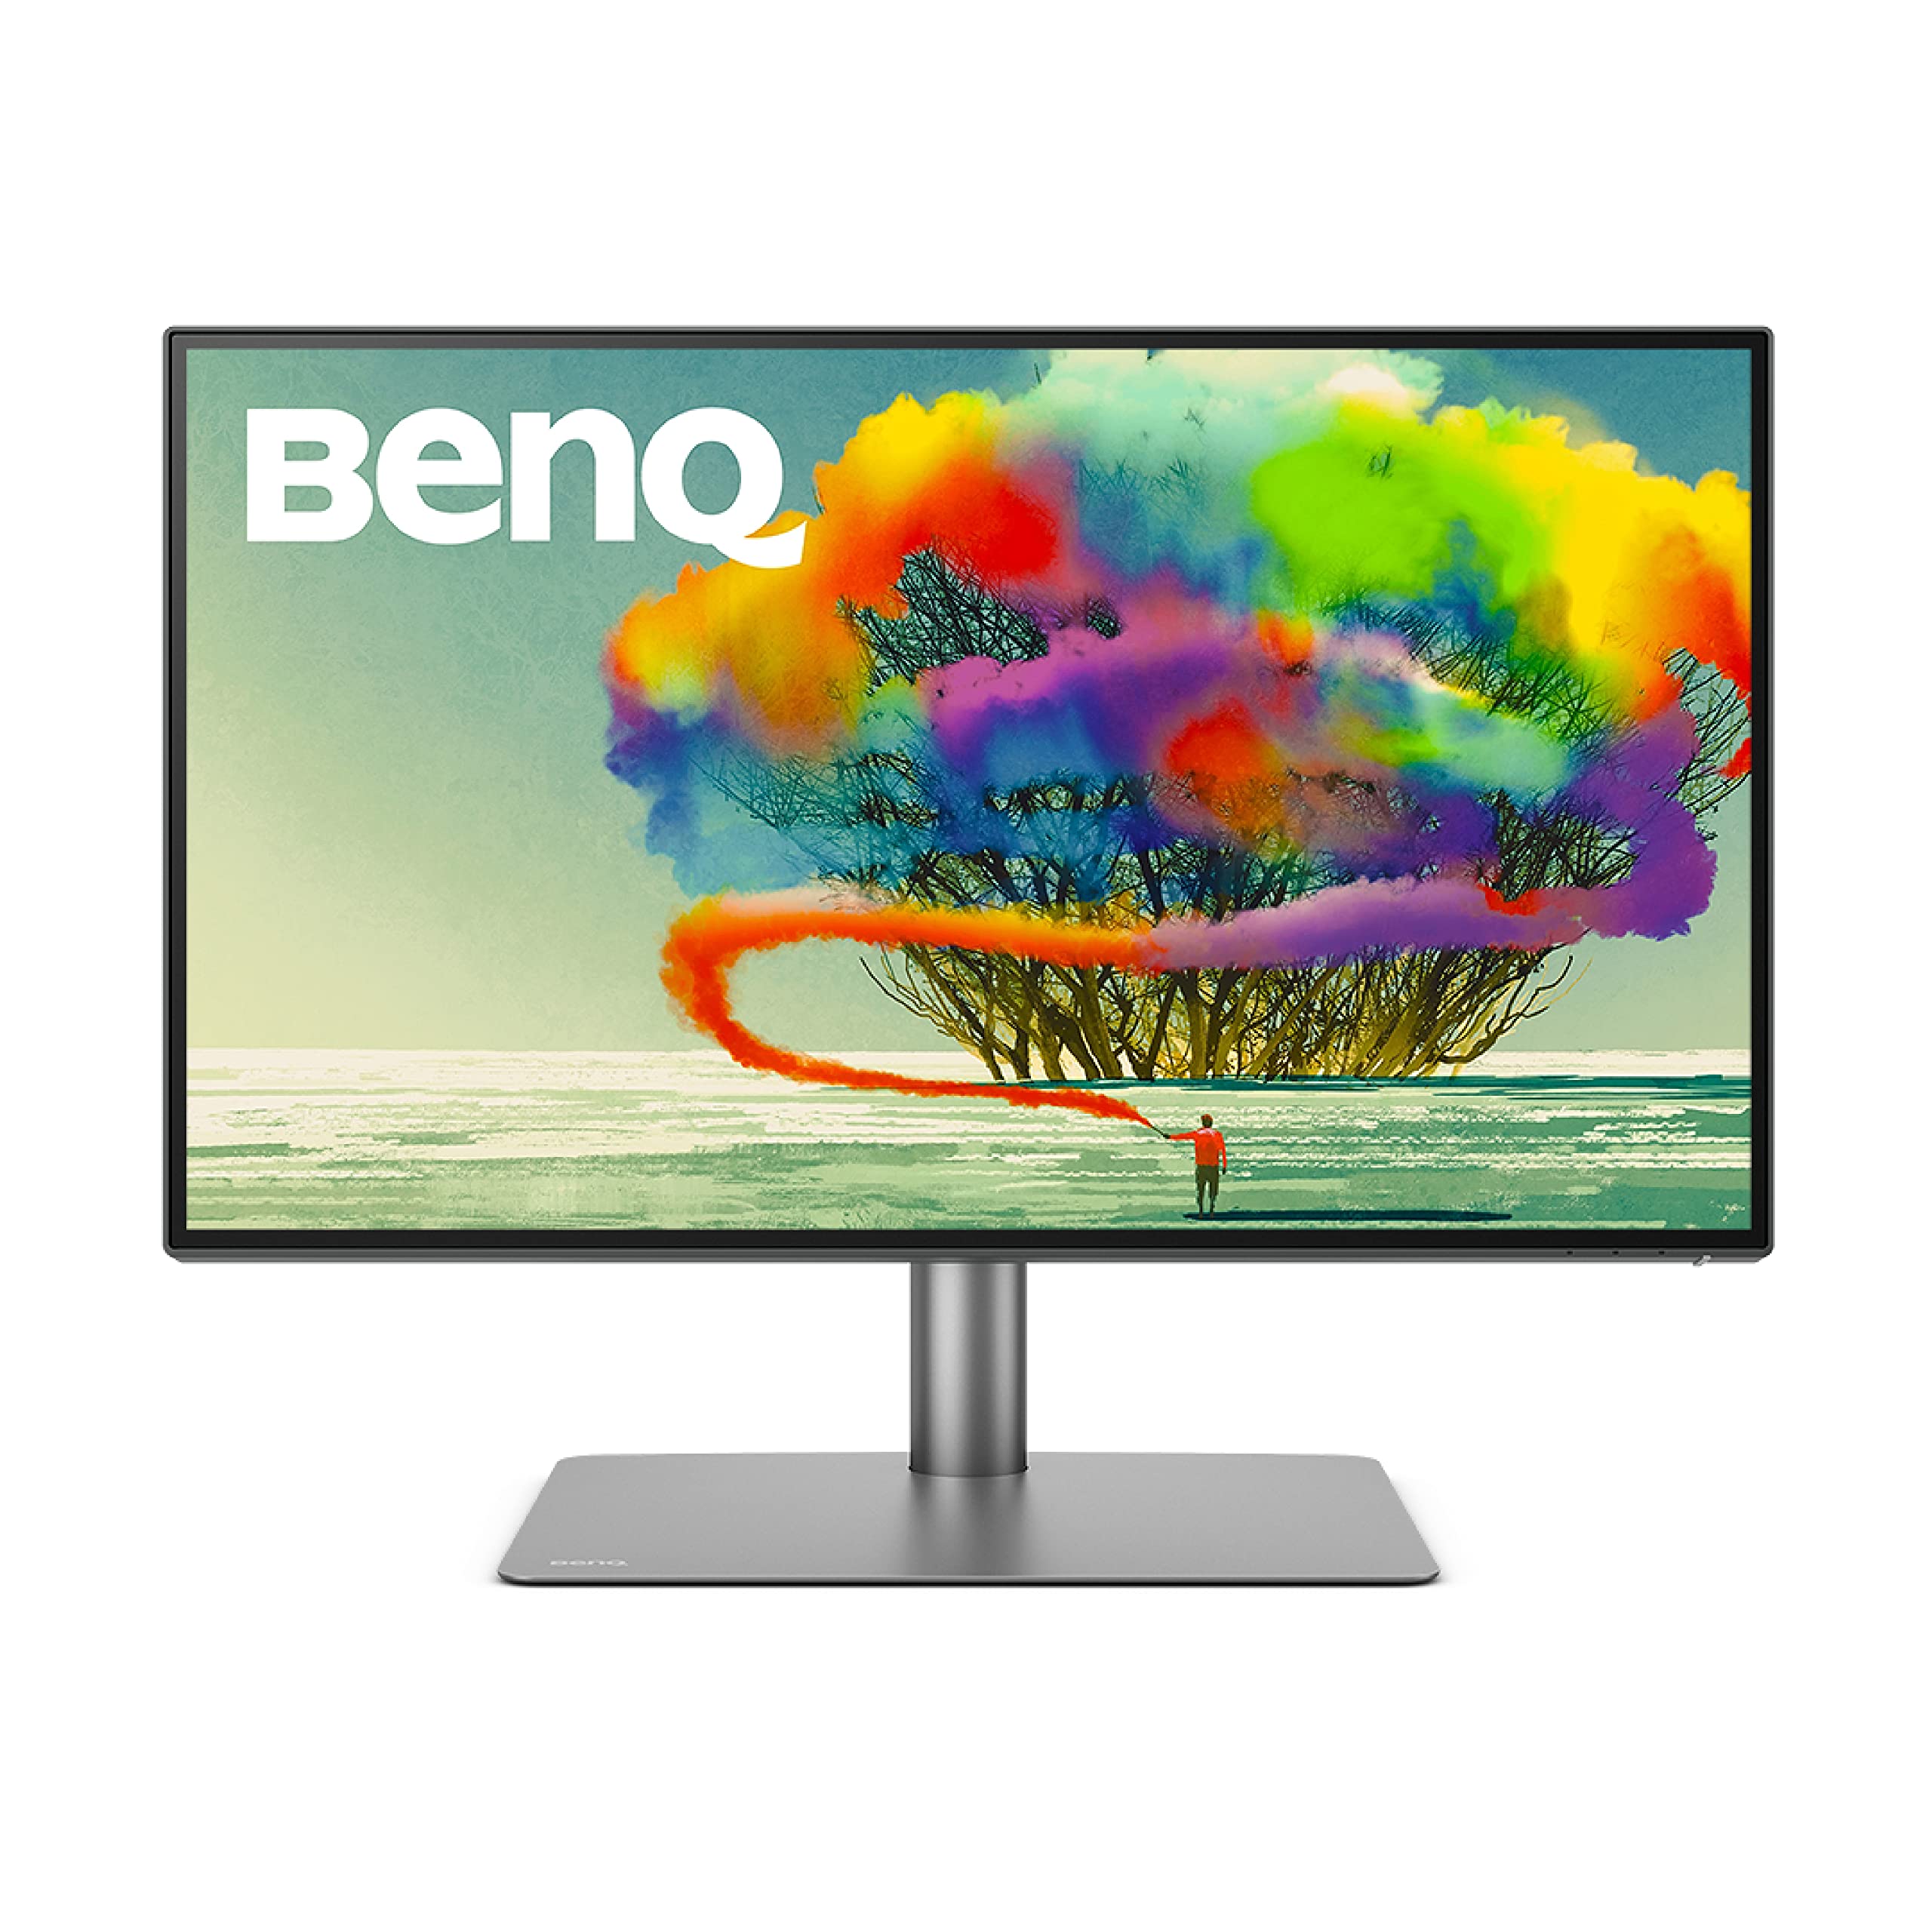 BenQ PD2725U 27 Inch 4K UHD AQCOLOR Computer Monitor with Thunderbolt 3 for MacBook, HDR, Mac-Ready, 100% sRGB and 95% P3, Daisy Chain, Hotkey Puck, DualView, Ergonomic Design, 65W Power Deliver